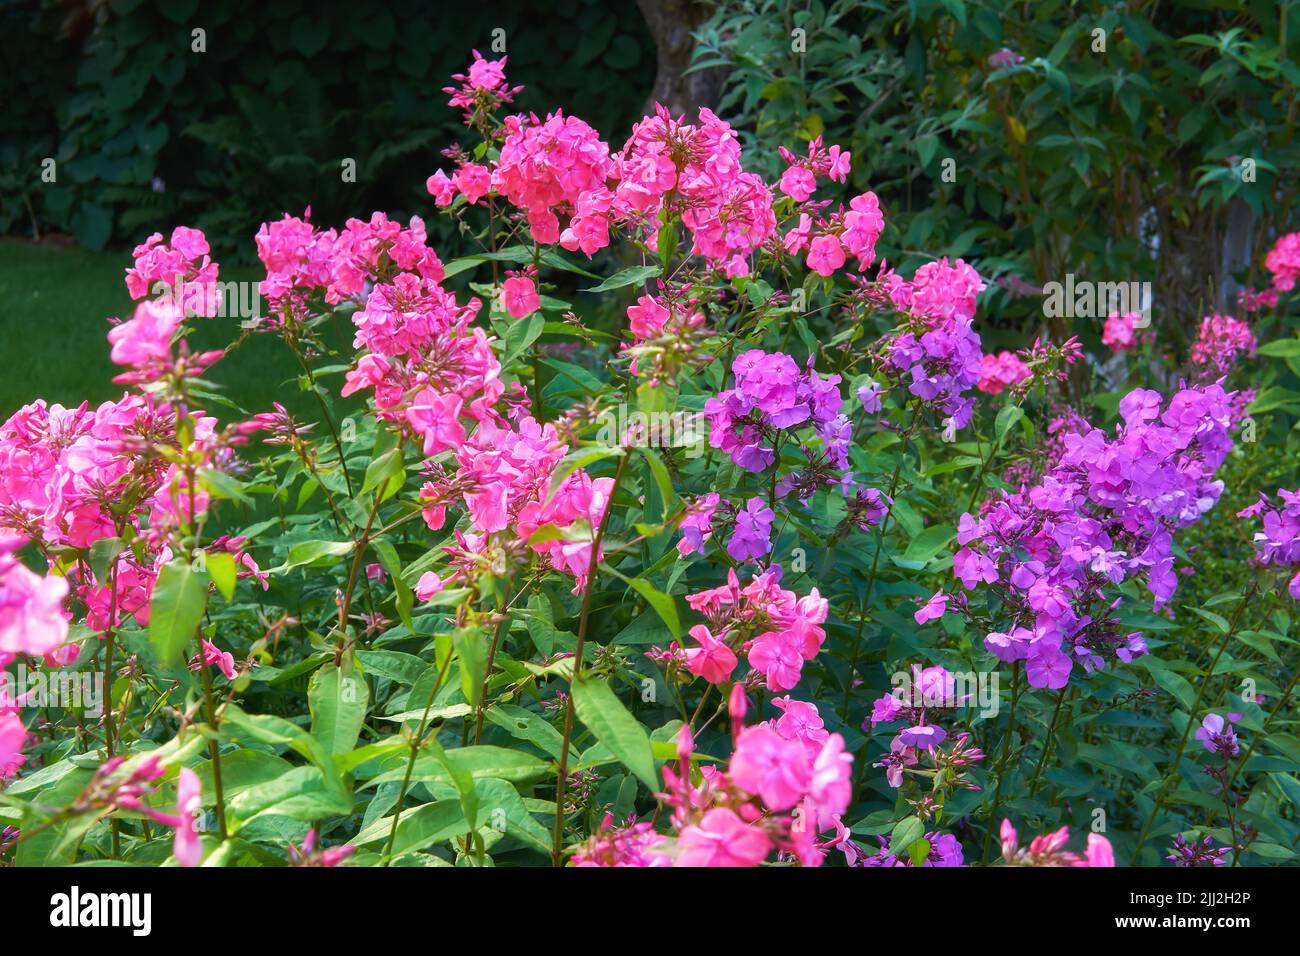 My garden. Lush landscape with colorful flowers growing in a garden on a sunny day outside in spring. Vibrant pink and purple floral fall phlox Stock Photo